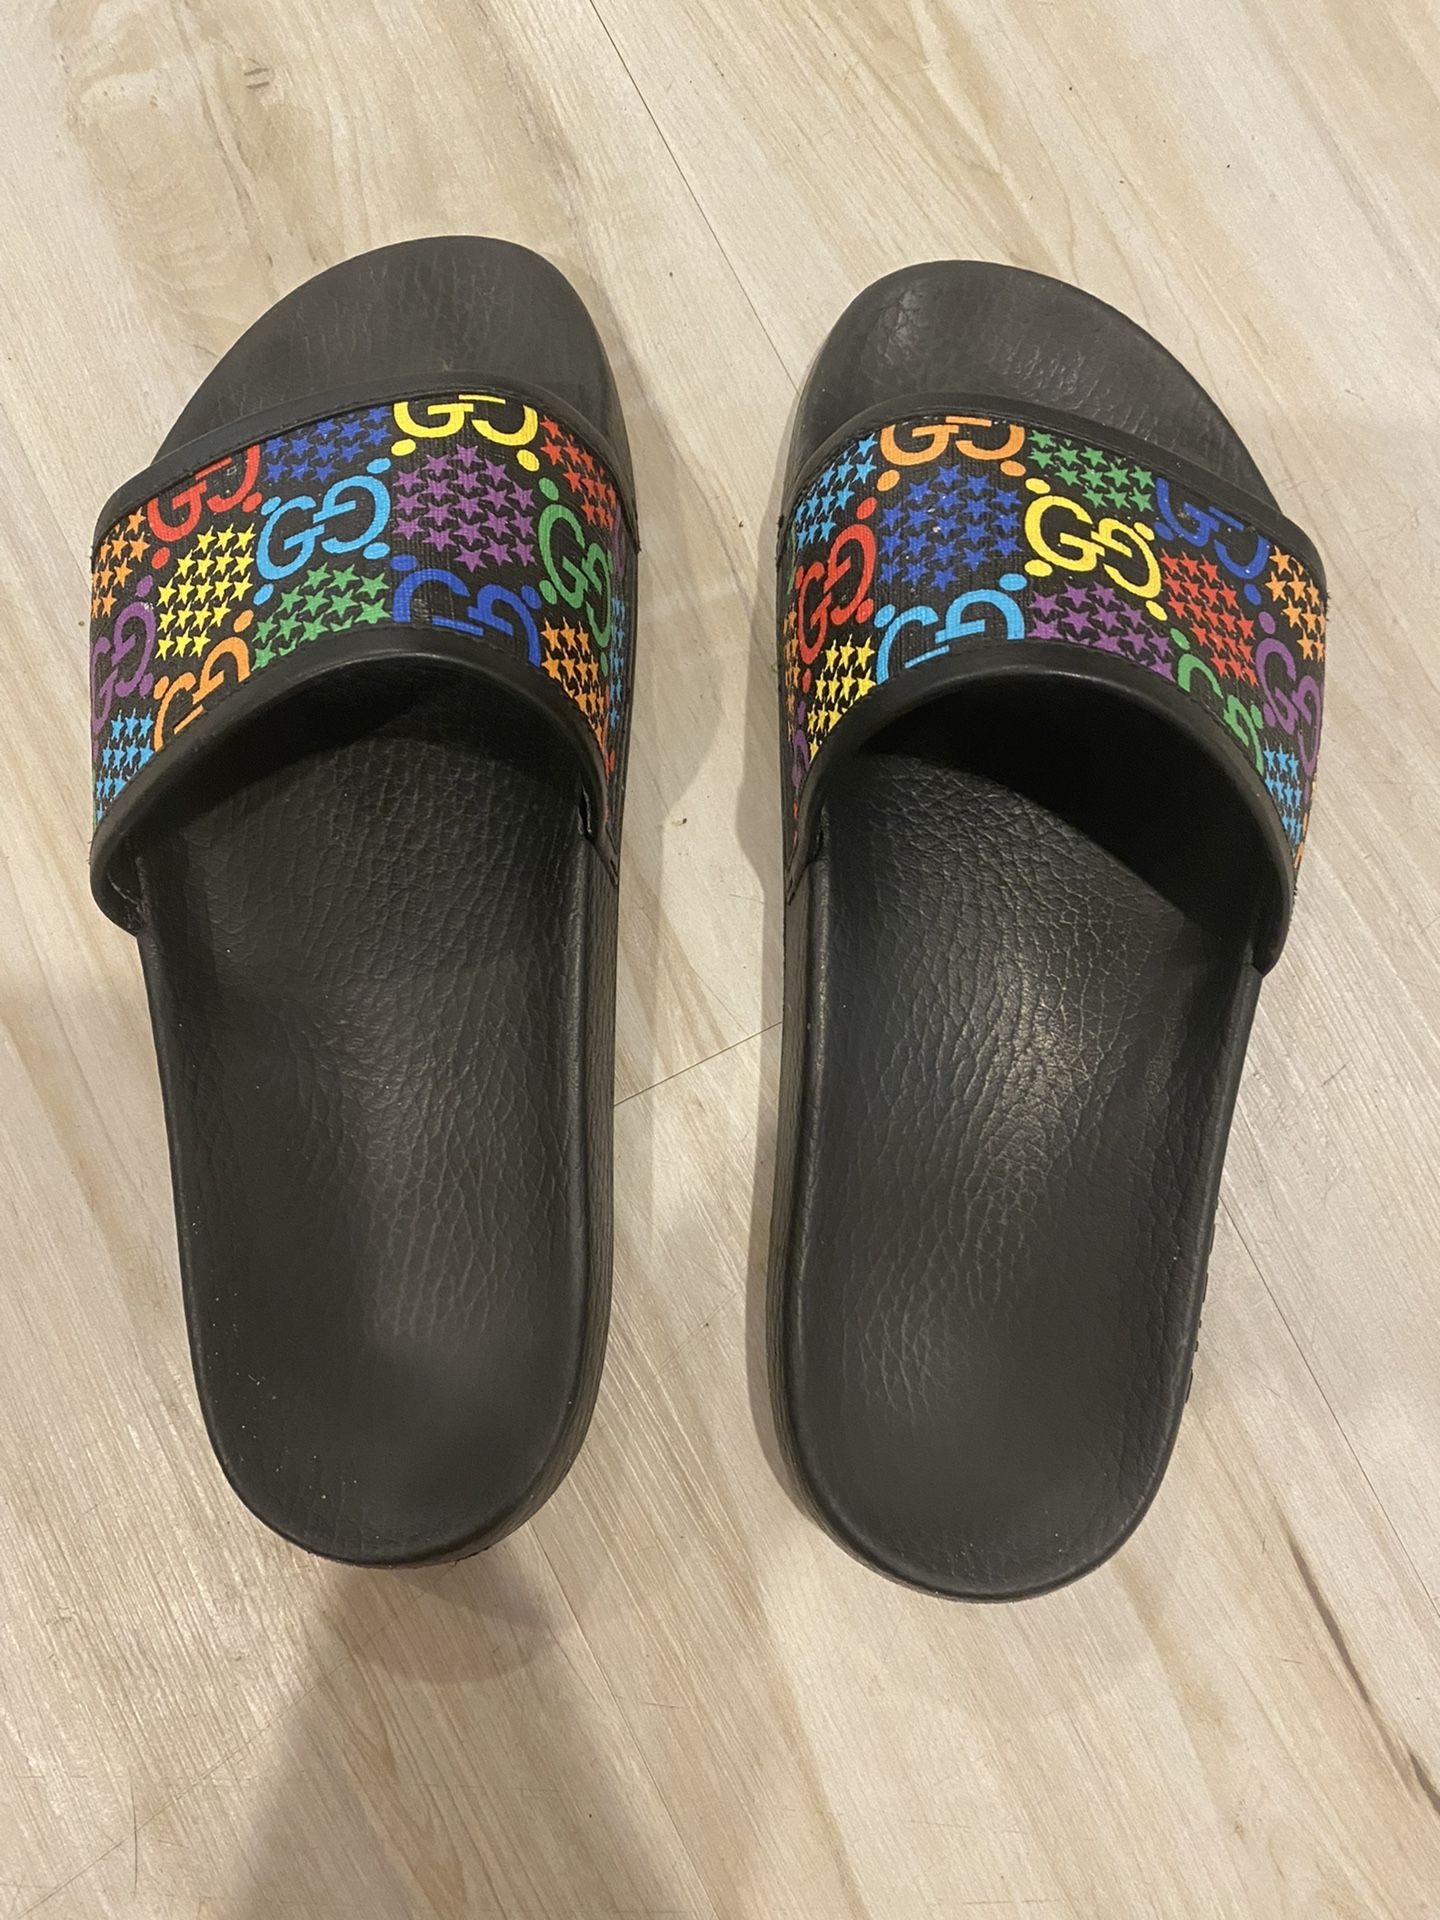 Gucci Men's GG Psychedelic Slides   Size 6  Lightly Used 